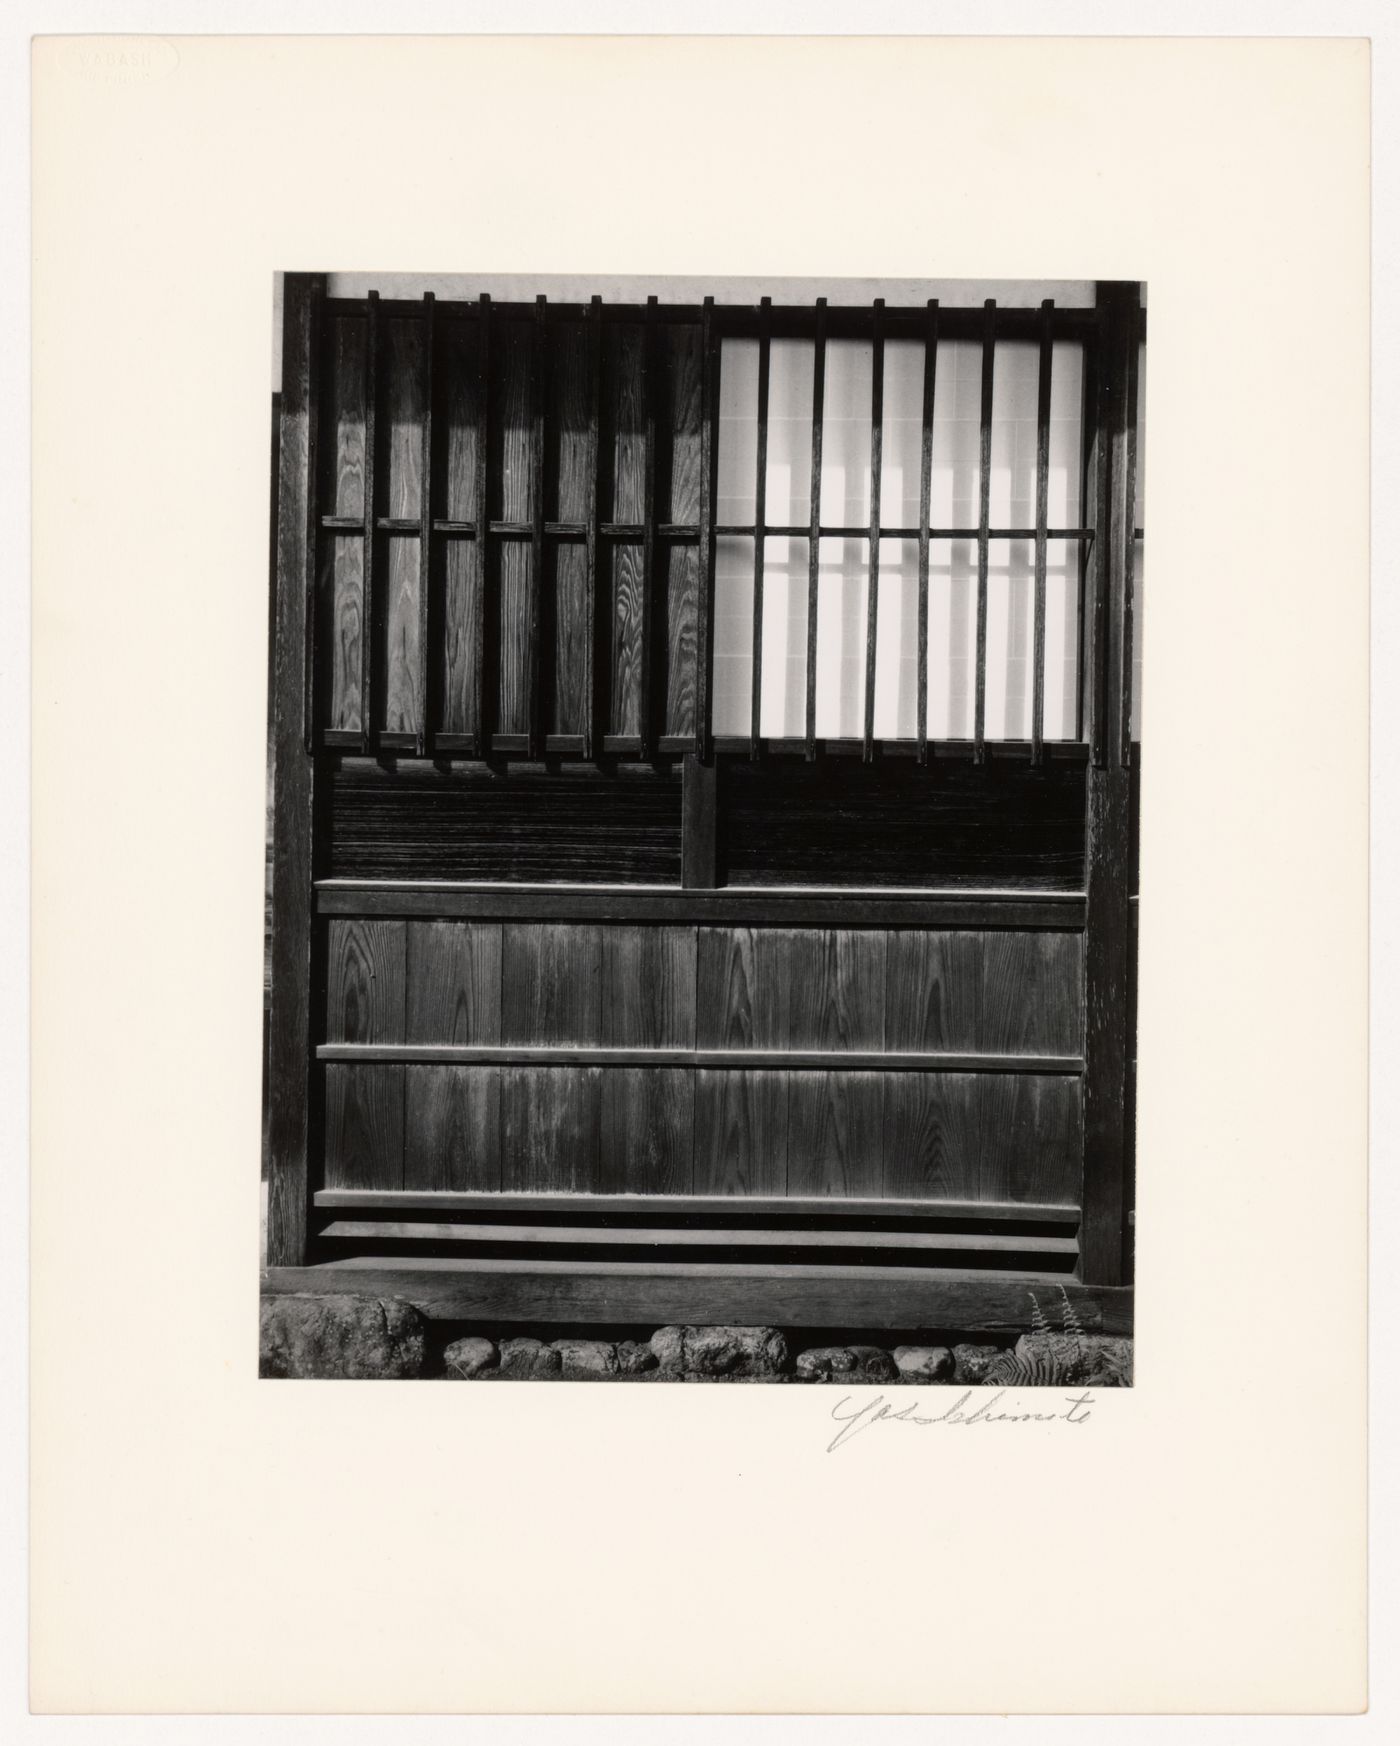 View of a wooden shutter and a shoji on the northeast wall of the Old Shoin, Katsura Rikyu (also known as Katsura Imperial Villa), Kyoto, Japan